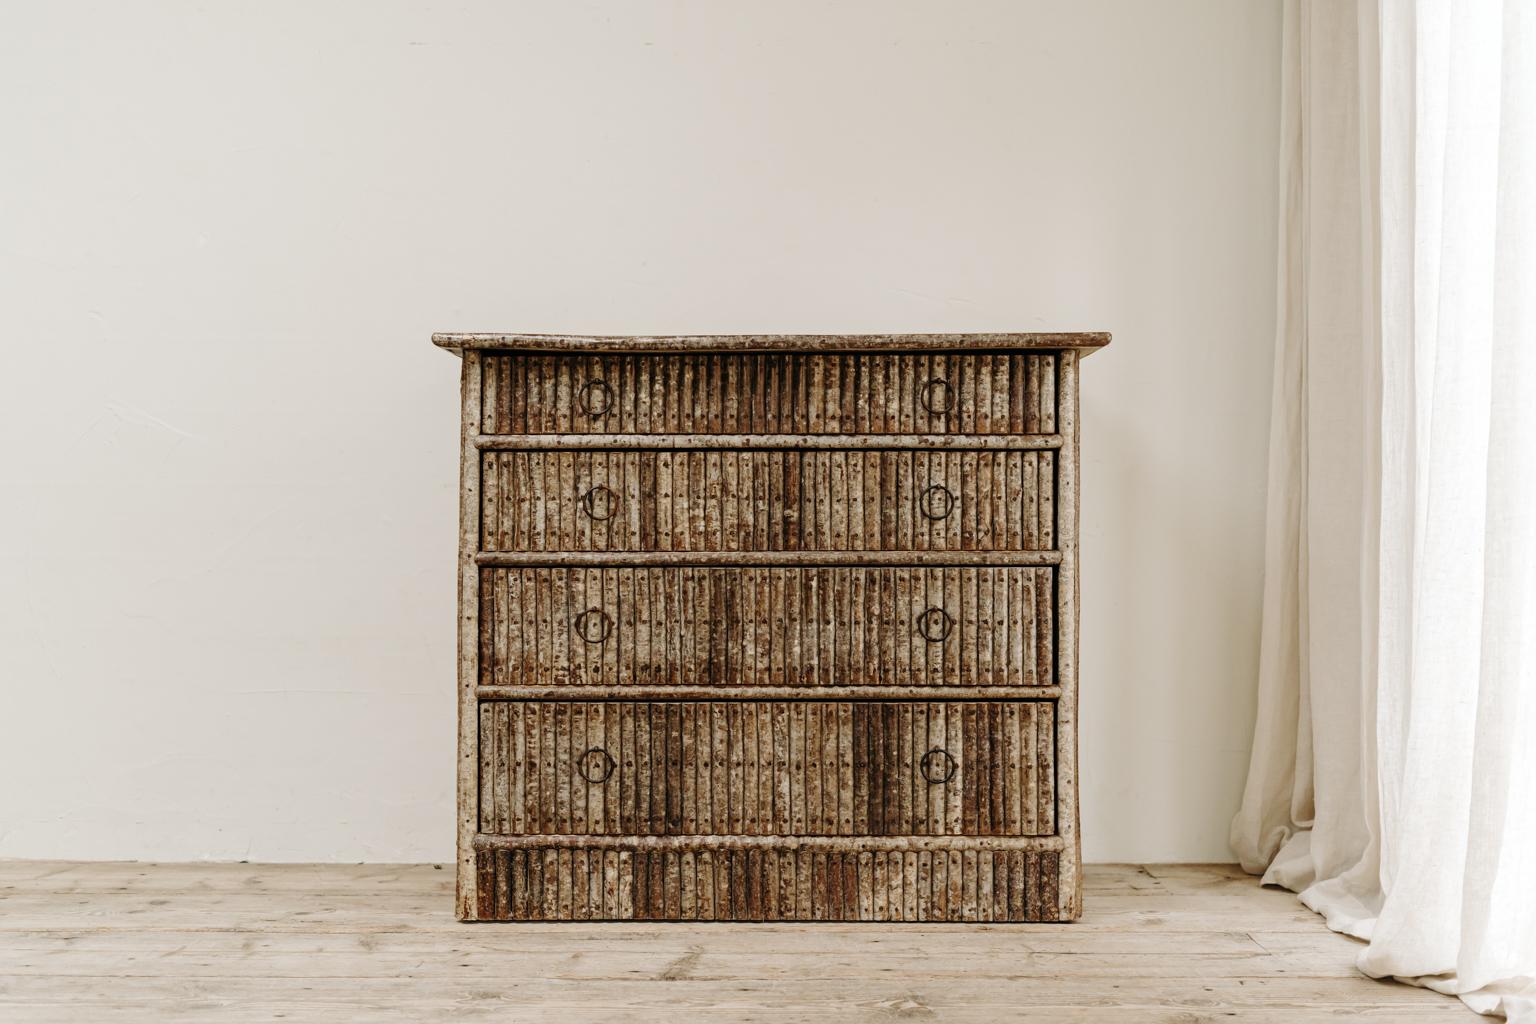 Found in the South West of France, this unique chest of drawers was made in 
poplarwood and hazelnut twig.